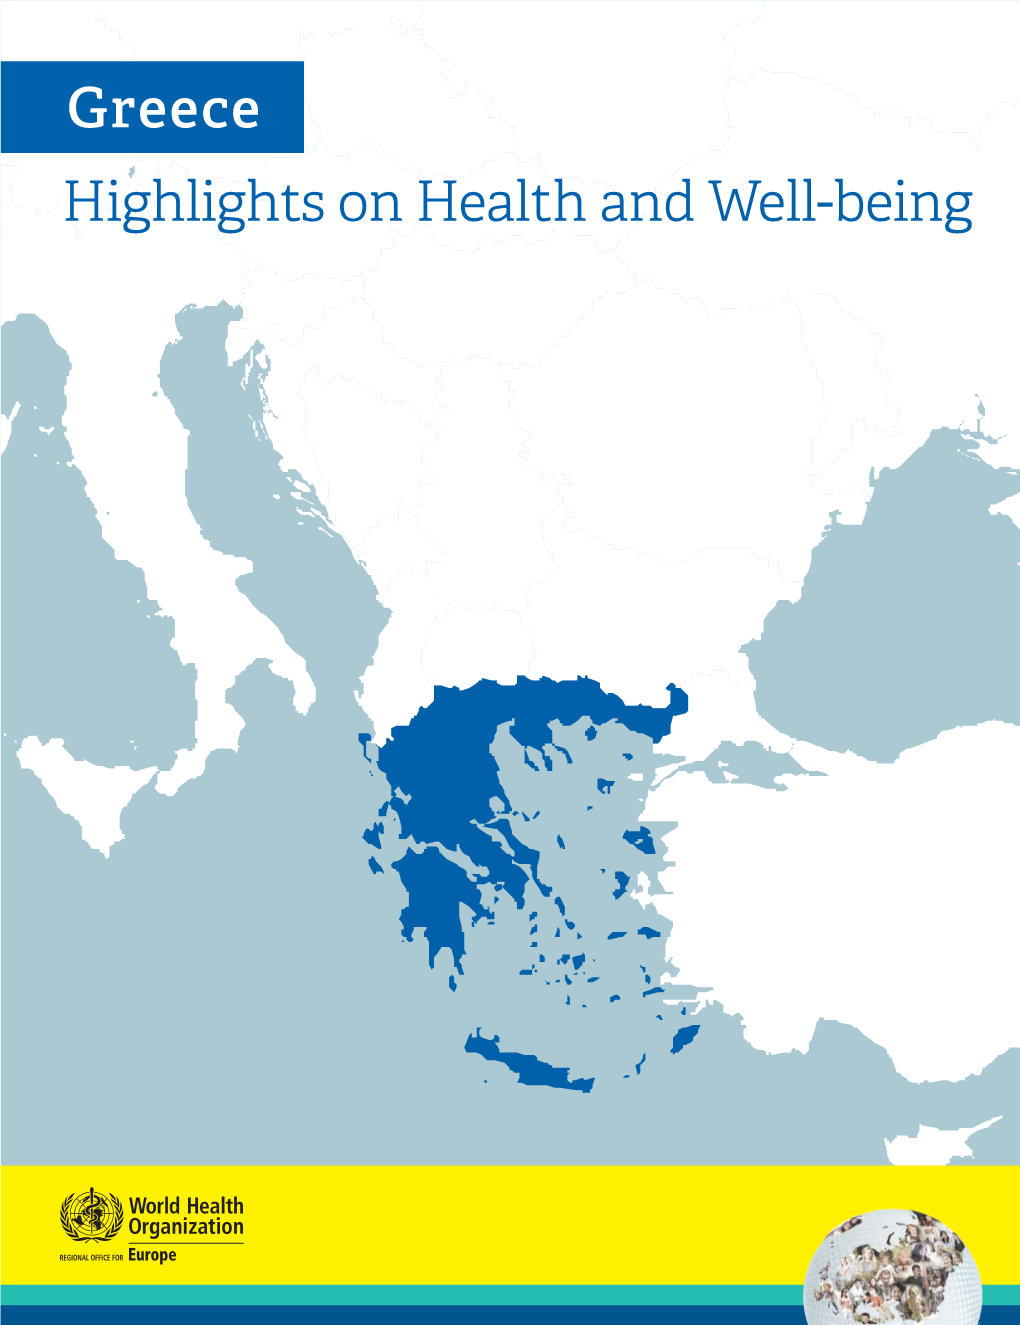 Greece: Highlights on Health and Well-Being